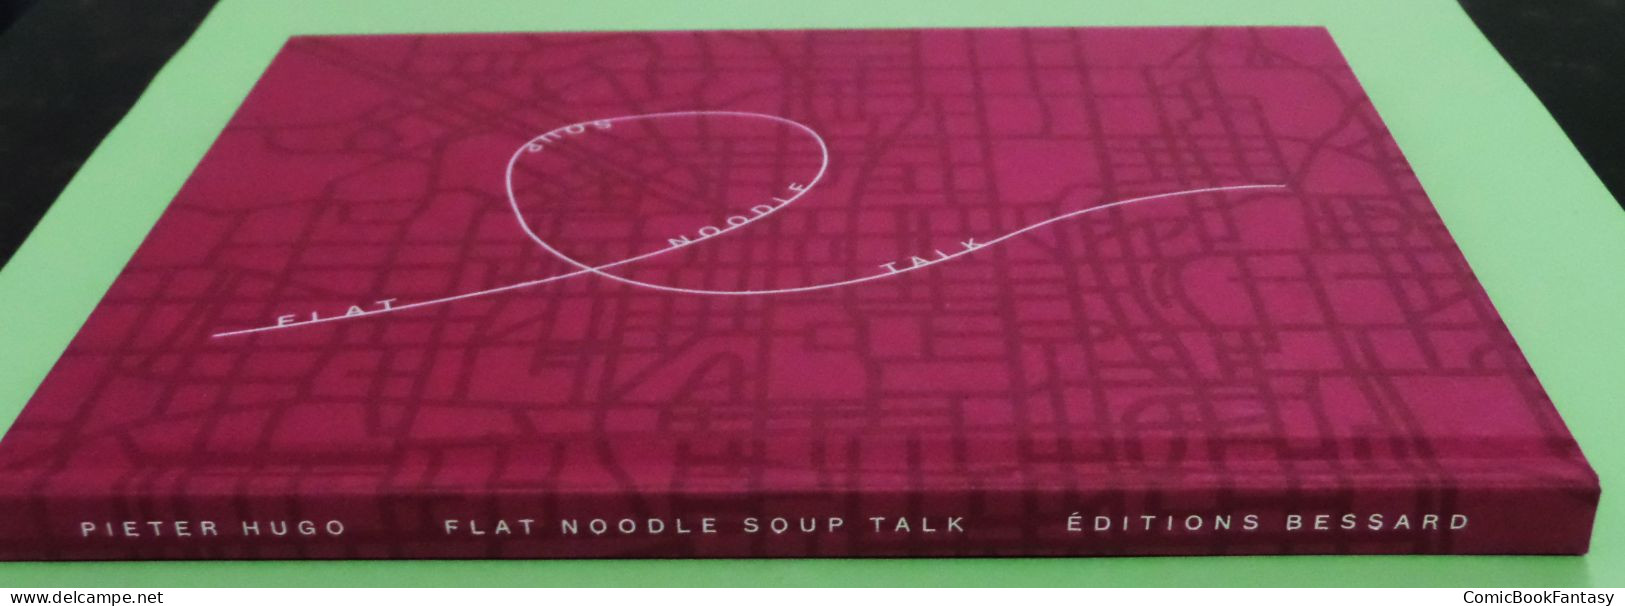 Pieter Hugo Flat Noodle Soup Talk. Limited Edition 1/500. SIGNED - New - Cultural